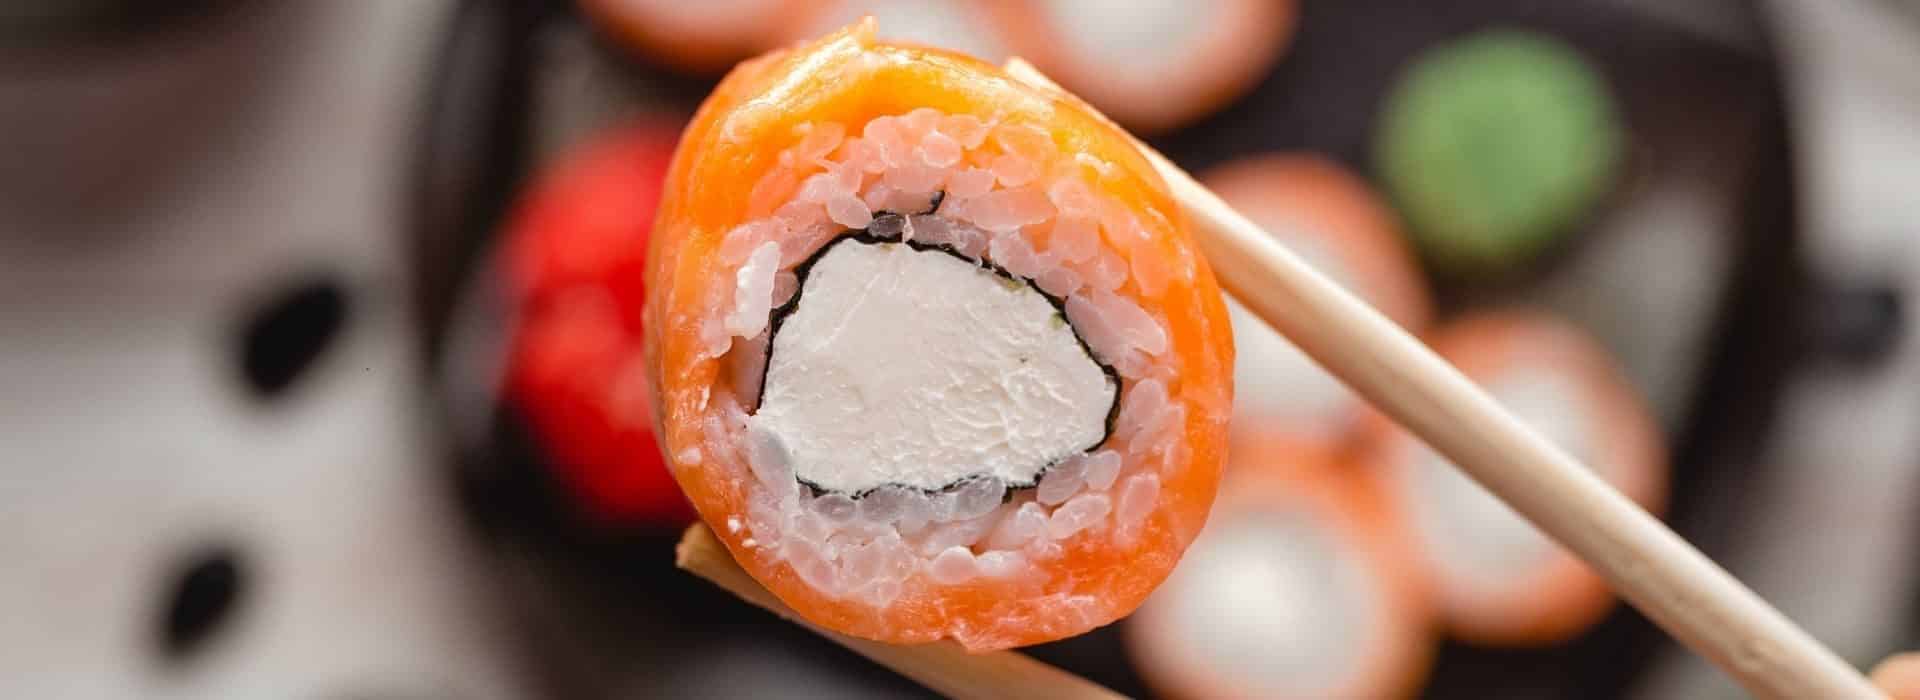 Sushi plate with sushi rolls and one held up close with chop sticks